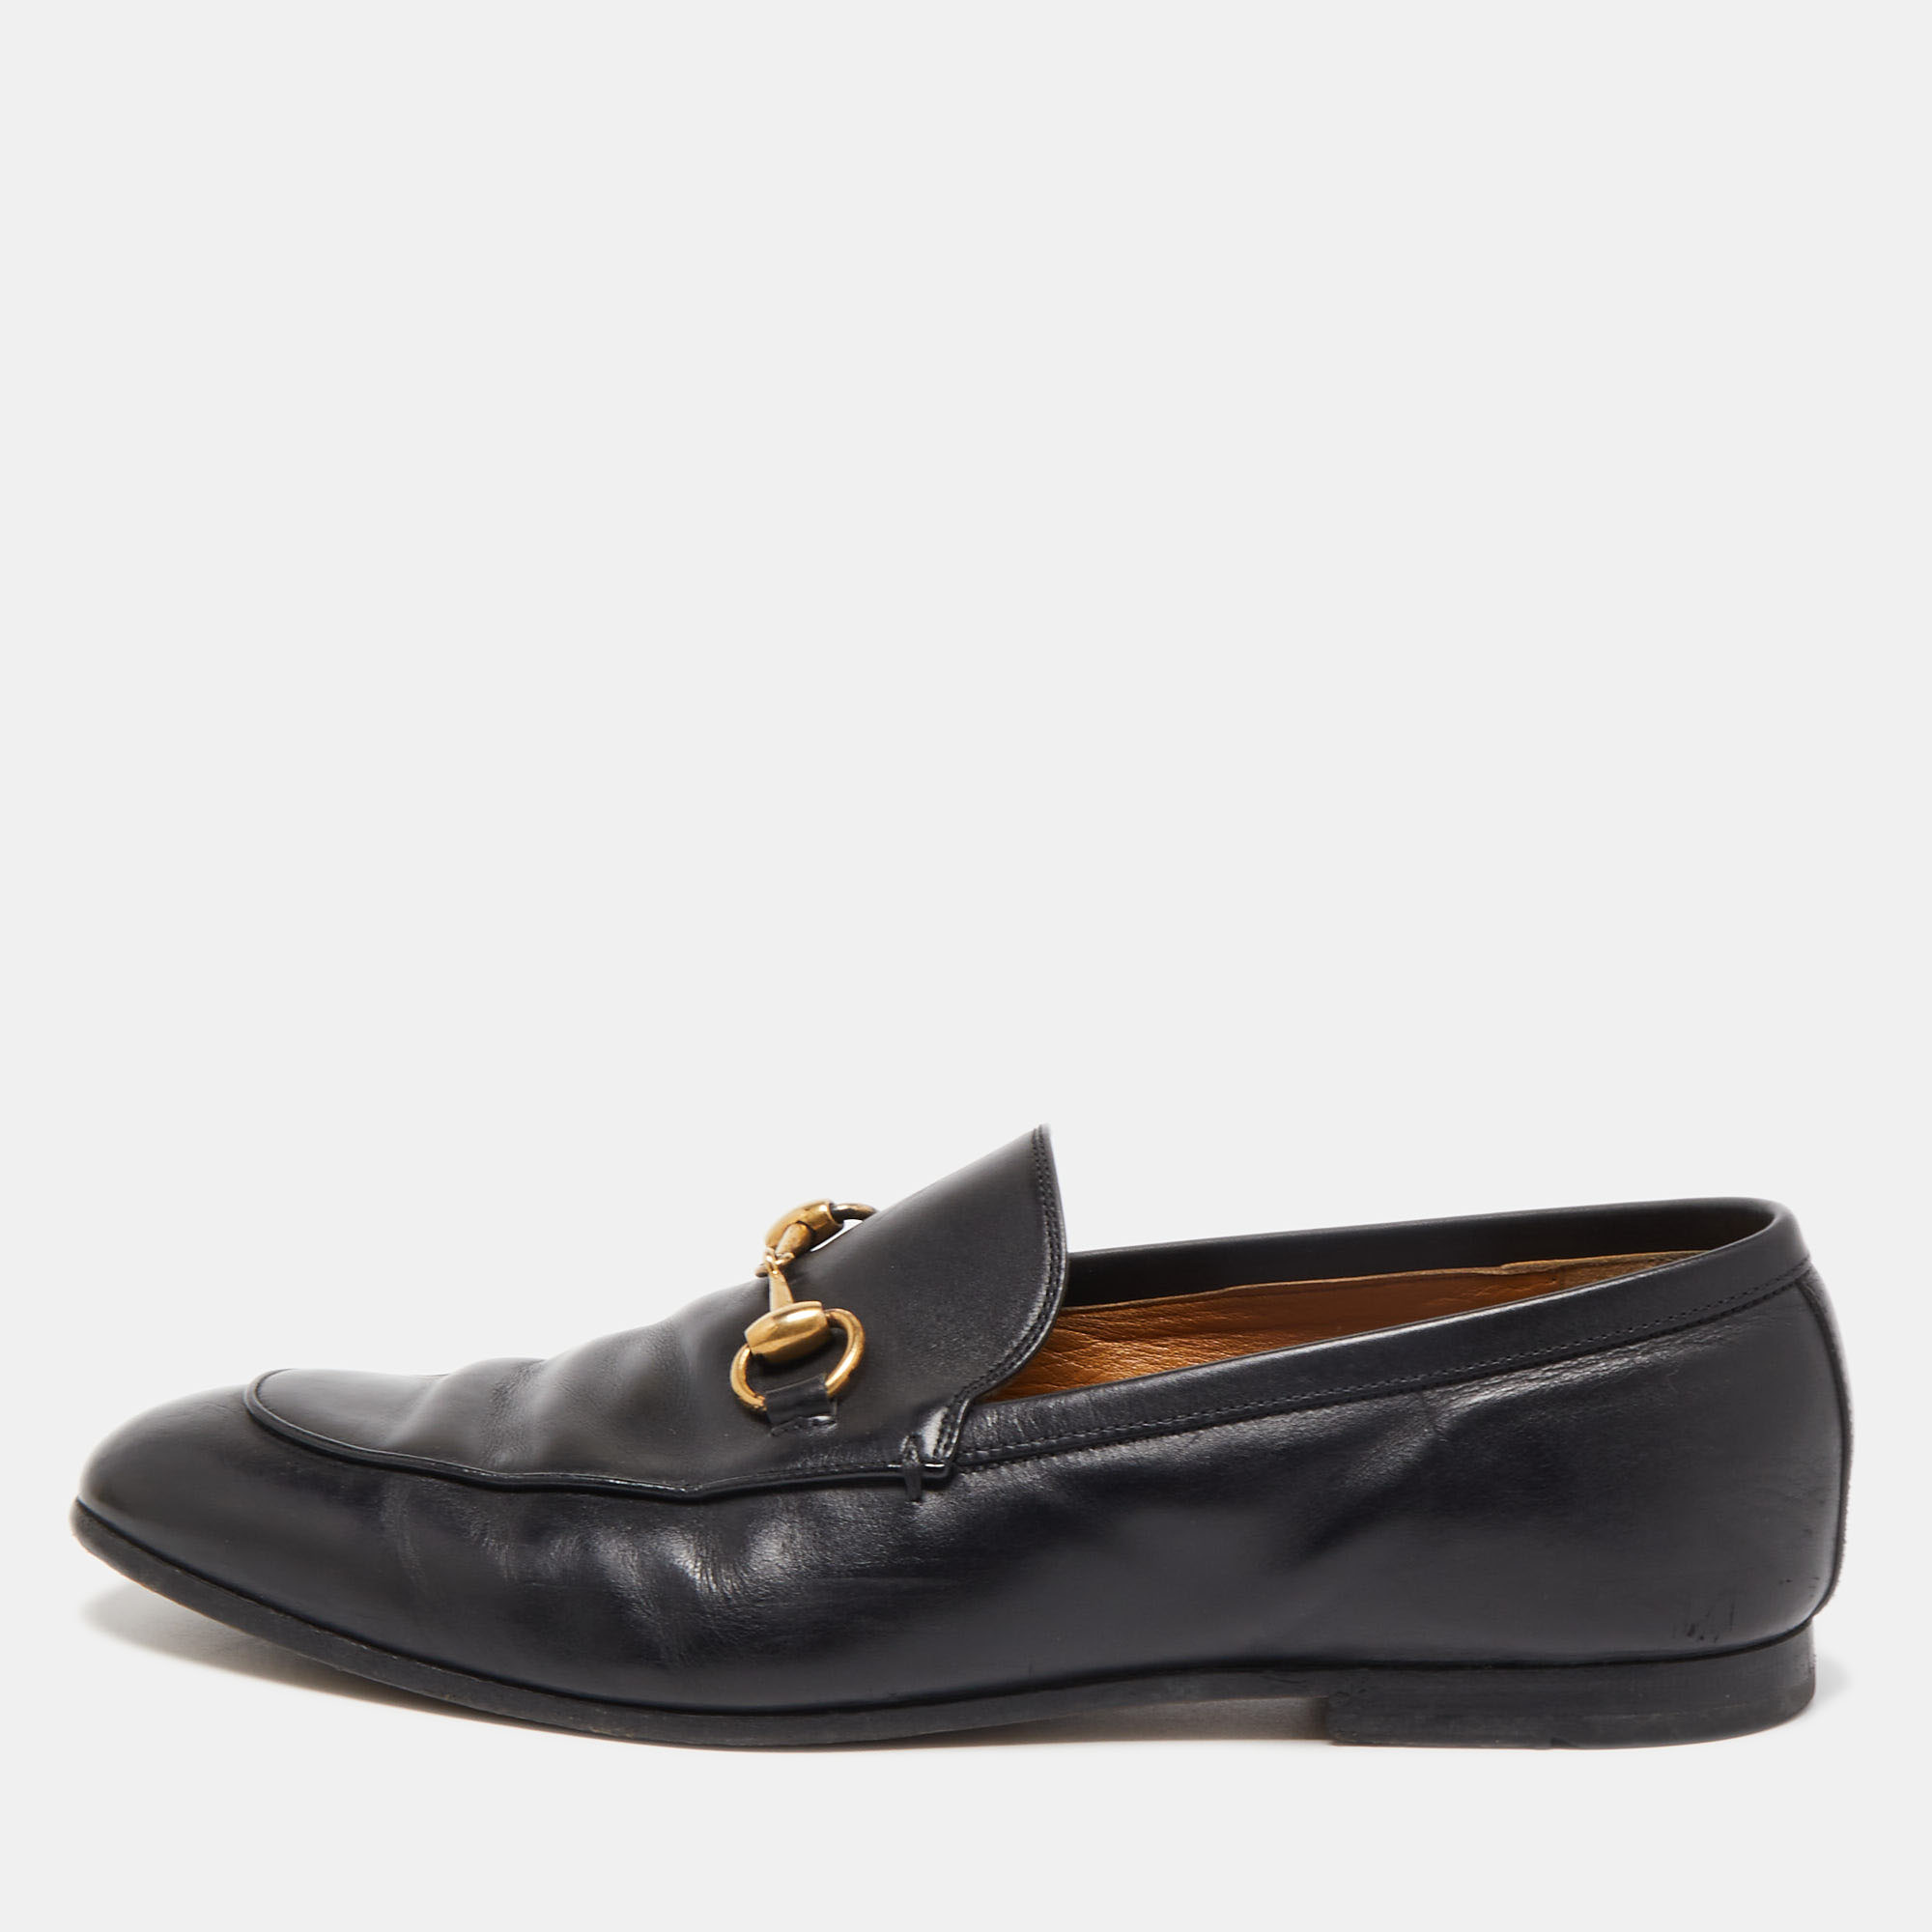 Gucci Black Leather Jordaan Loafers Size 41